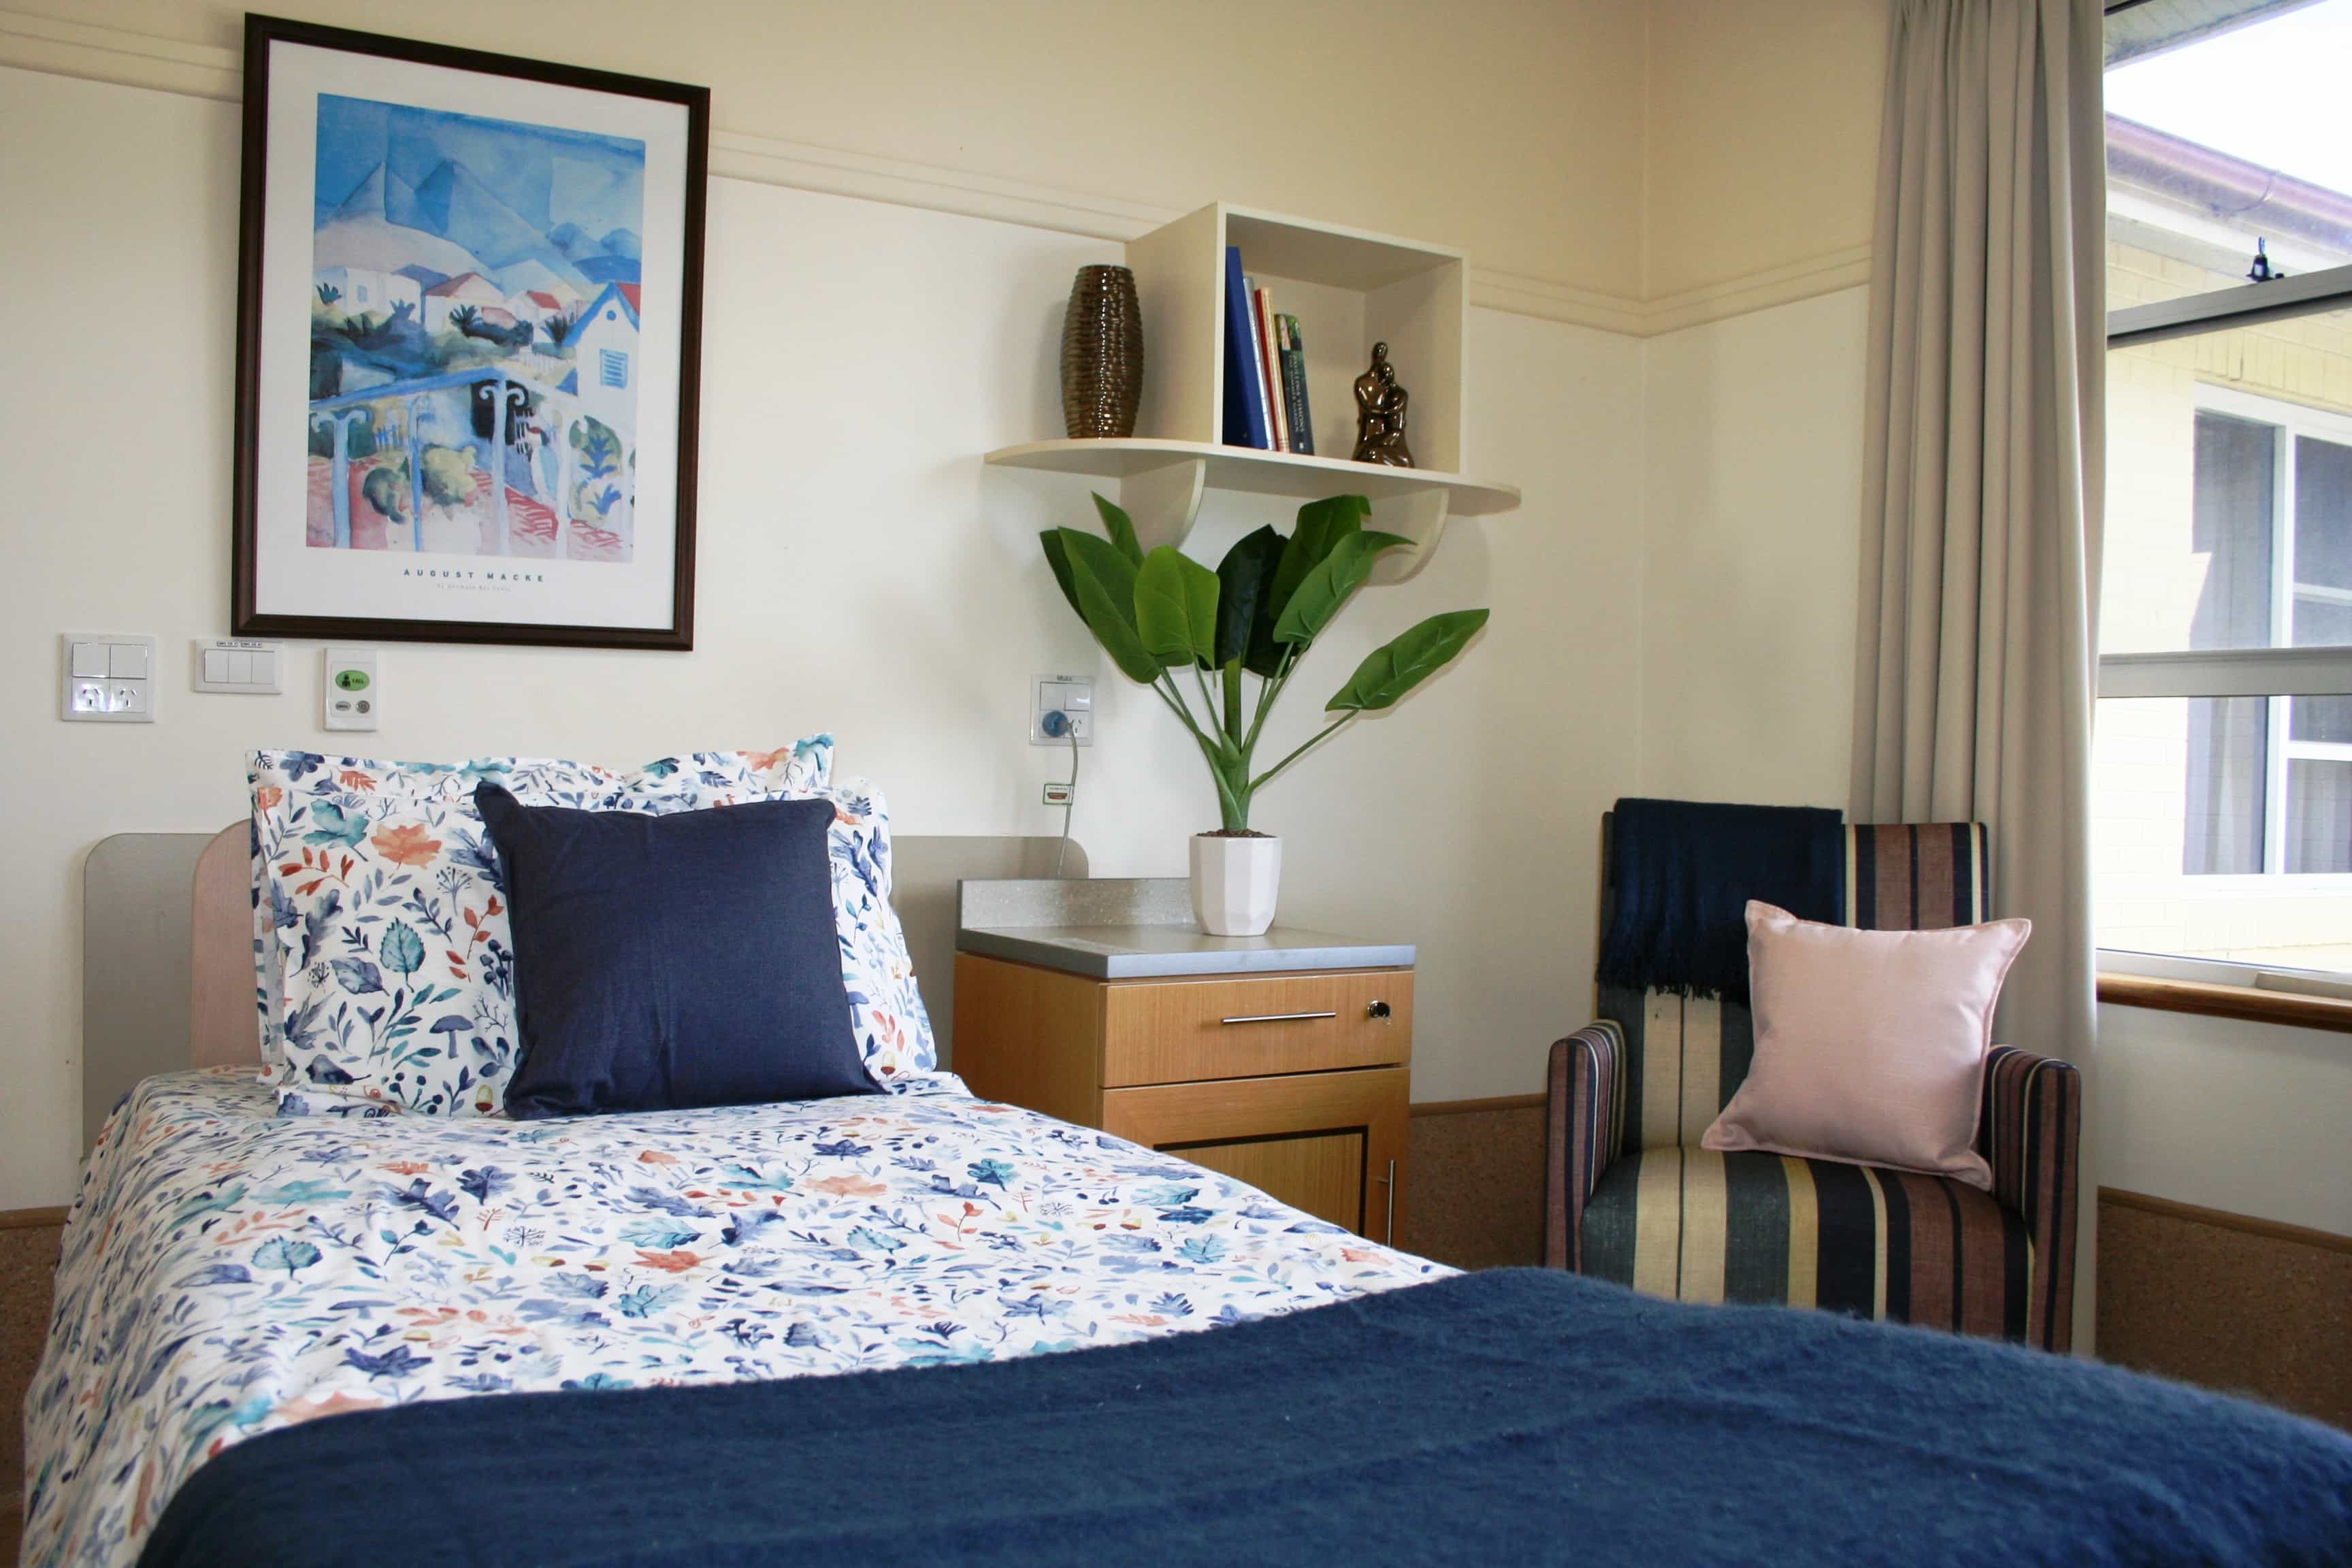 A quaint single bedroom fit with a painting and lush greenery at Whiddon Easton Park, an aged care home in Glenfield.